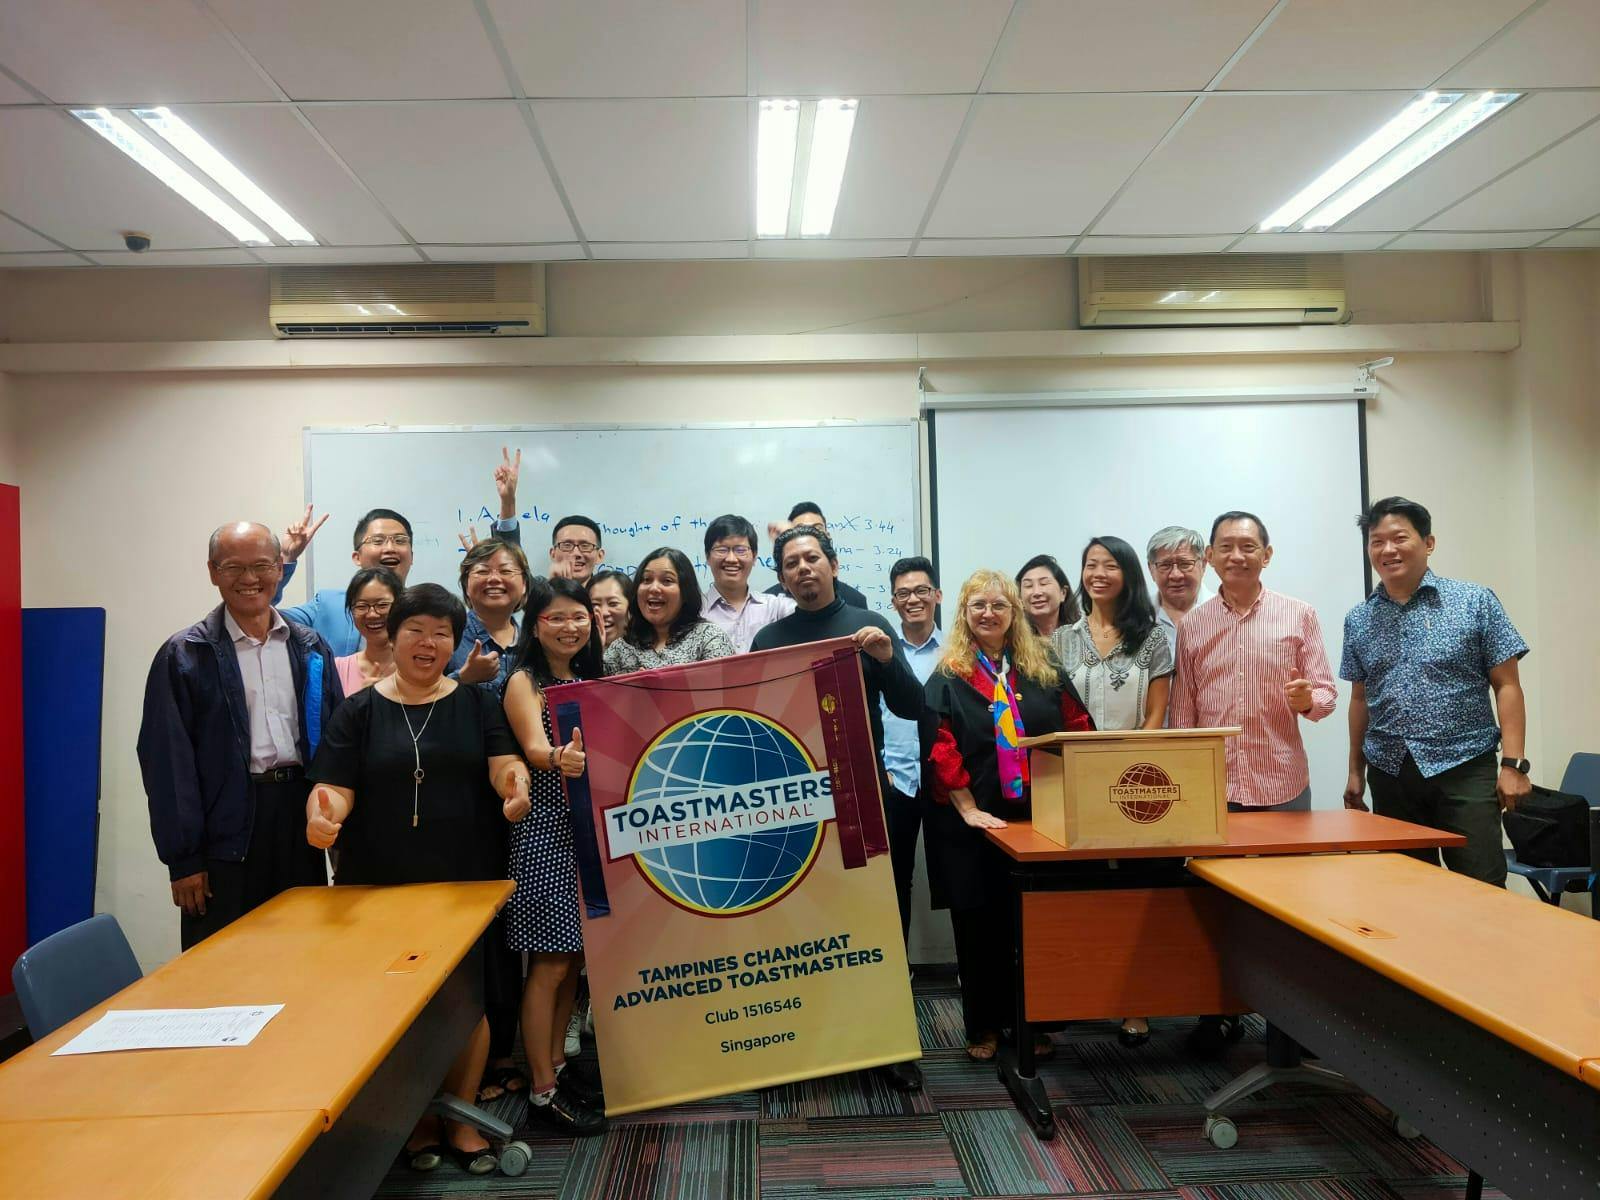 Tampines Changkat Advanced Toastmasters Club Meeting - Humorous Speech & Evaluation Contest. 